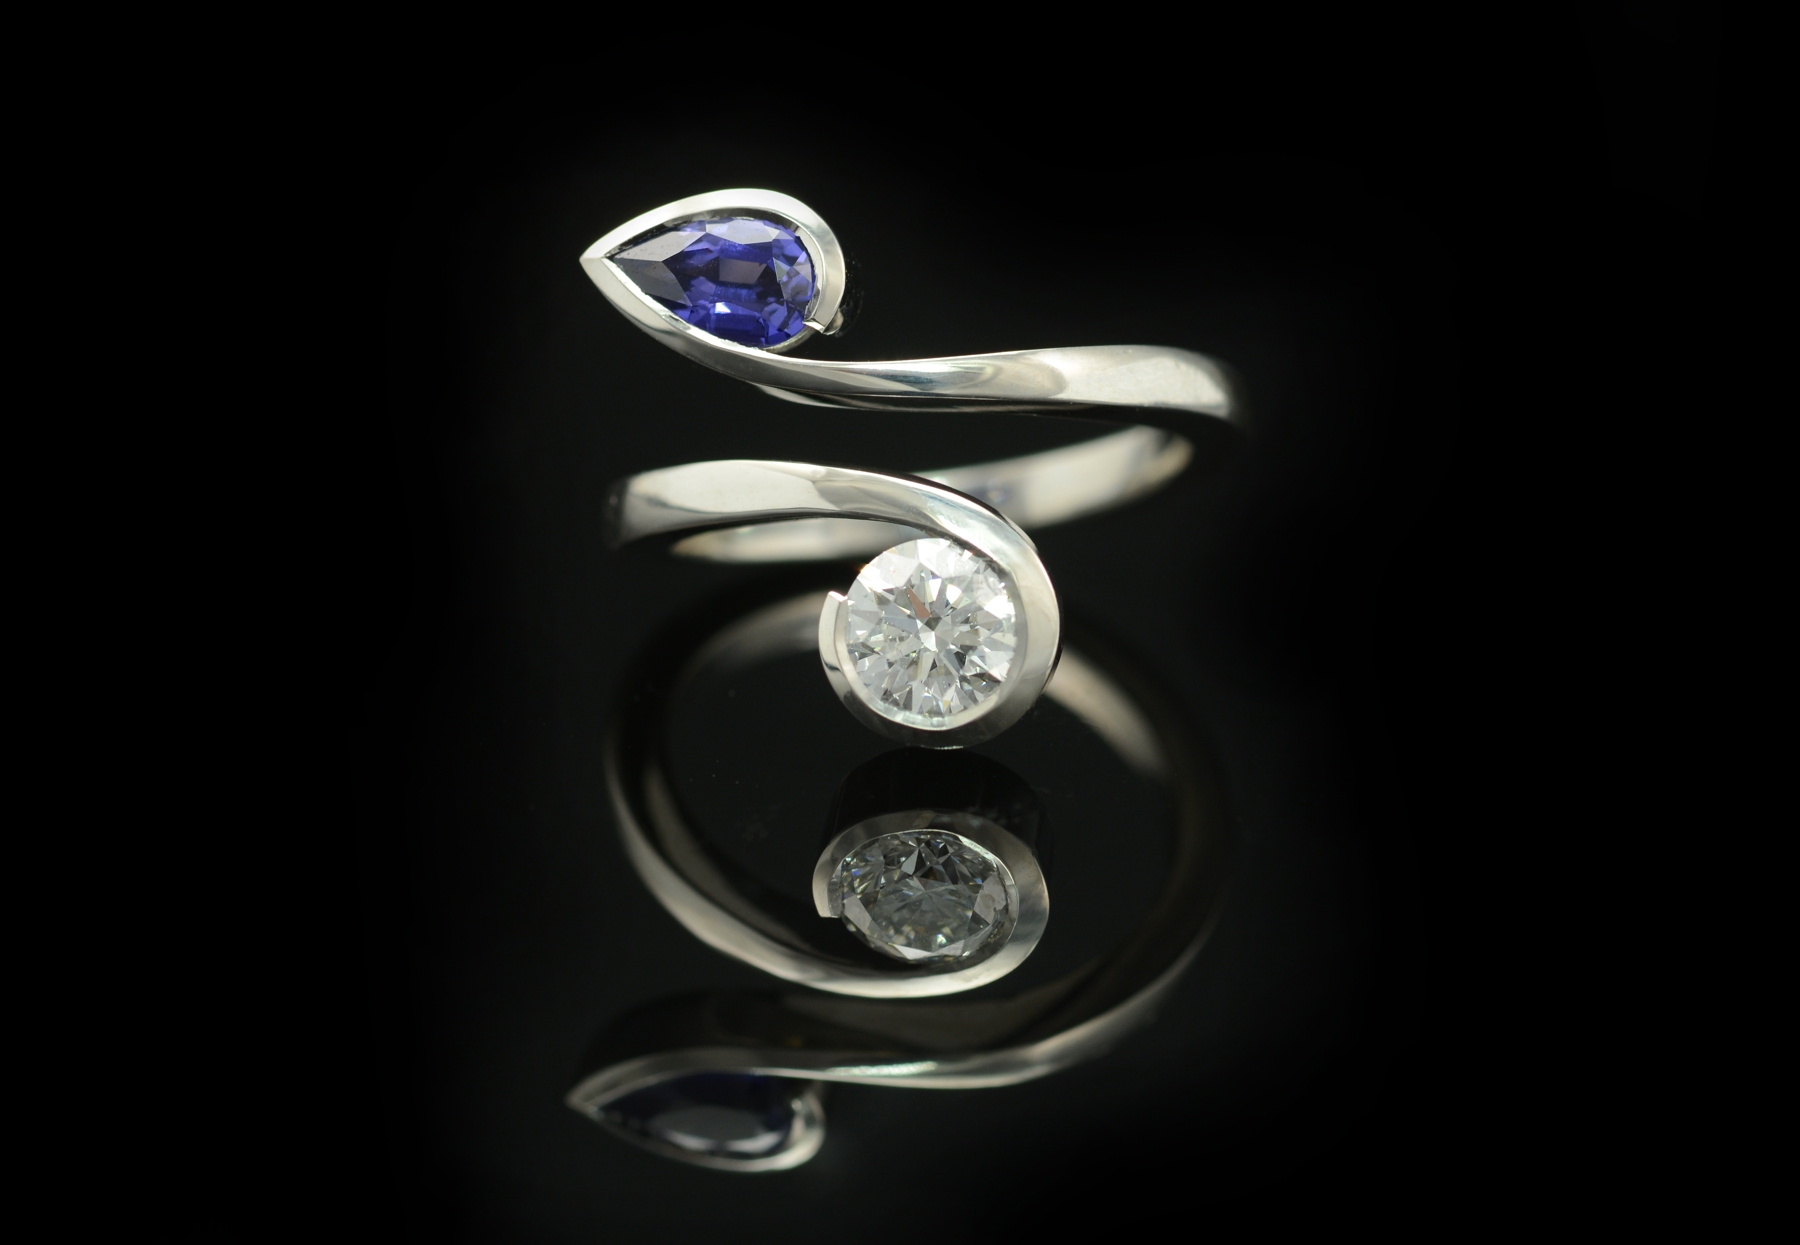 Two stone cocktail ring, hand forged from white gold and set with blue sapphire and white diamond